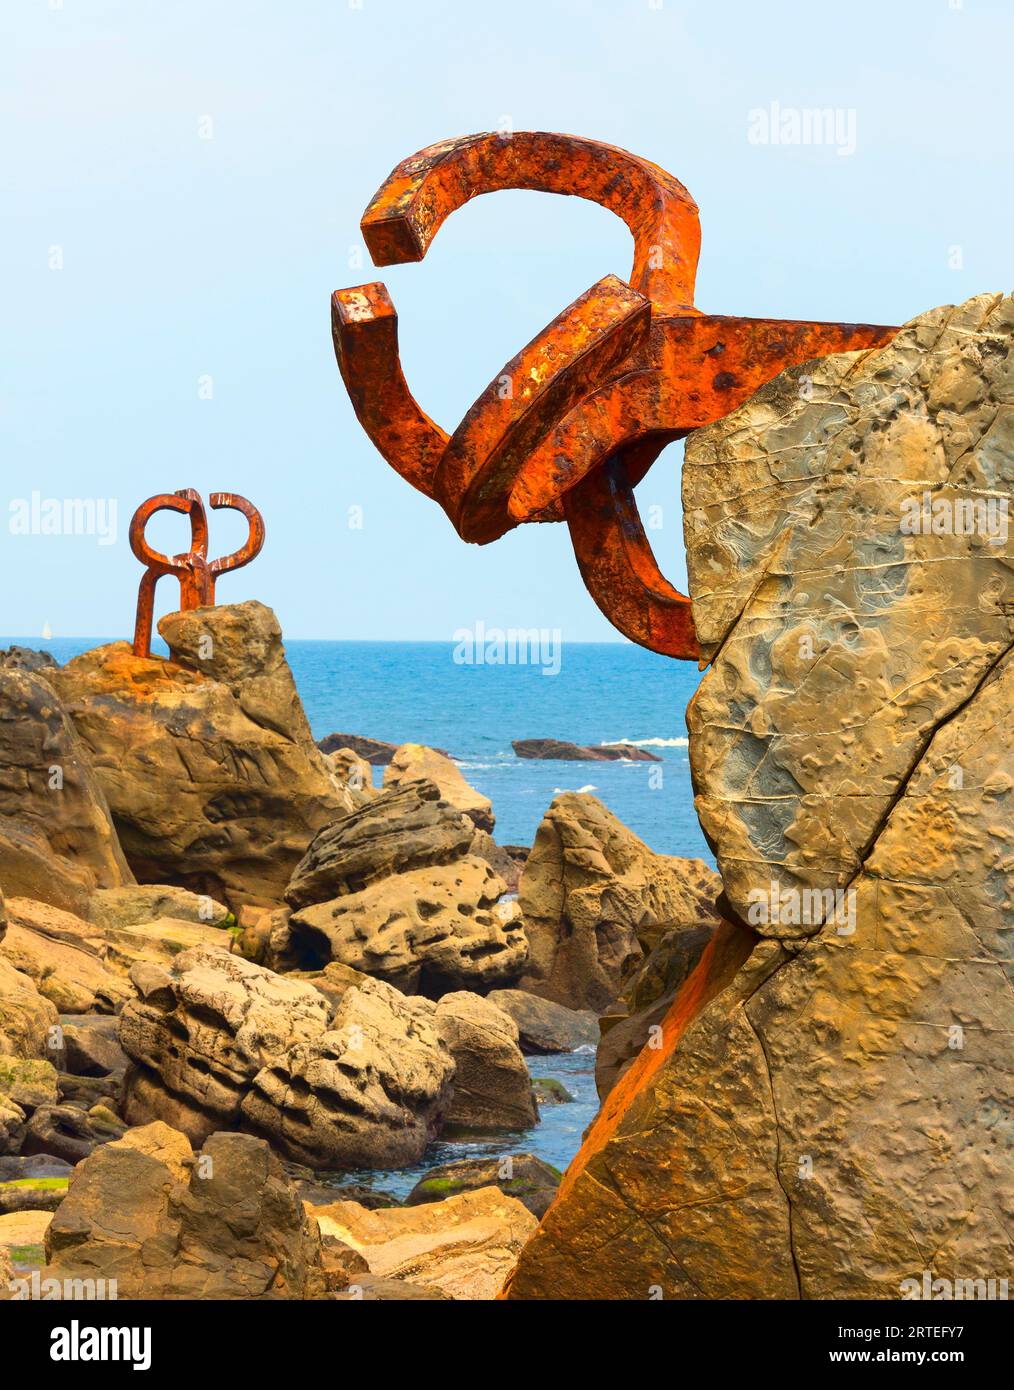 Bronze sculptures, Comb of the Wind by Eduardo Chillida, situated on the rocky shore of the Sea Resort Town of San Sebastian in Basque Country Stock Photo